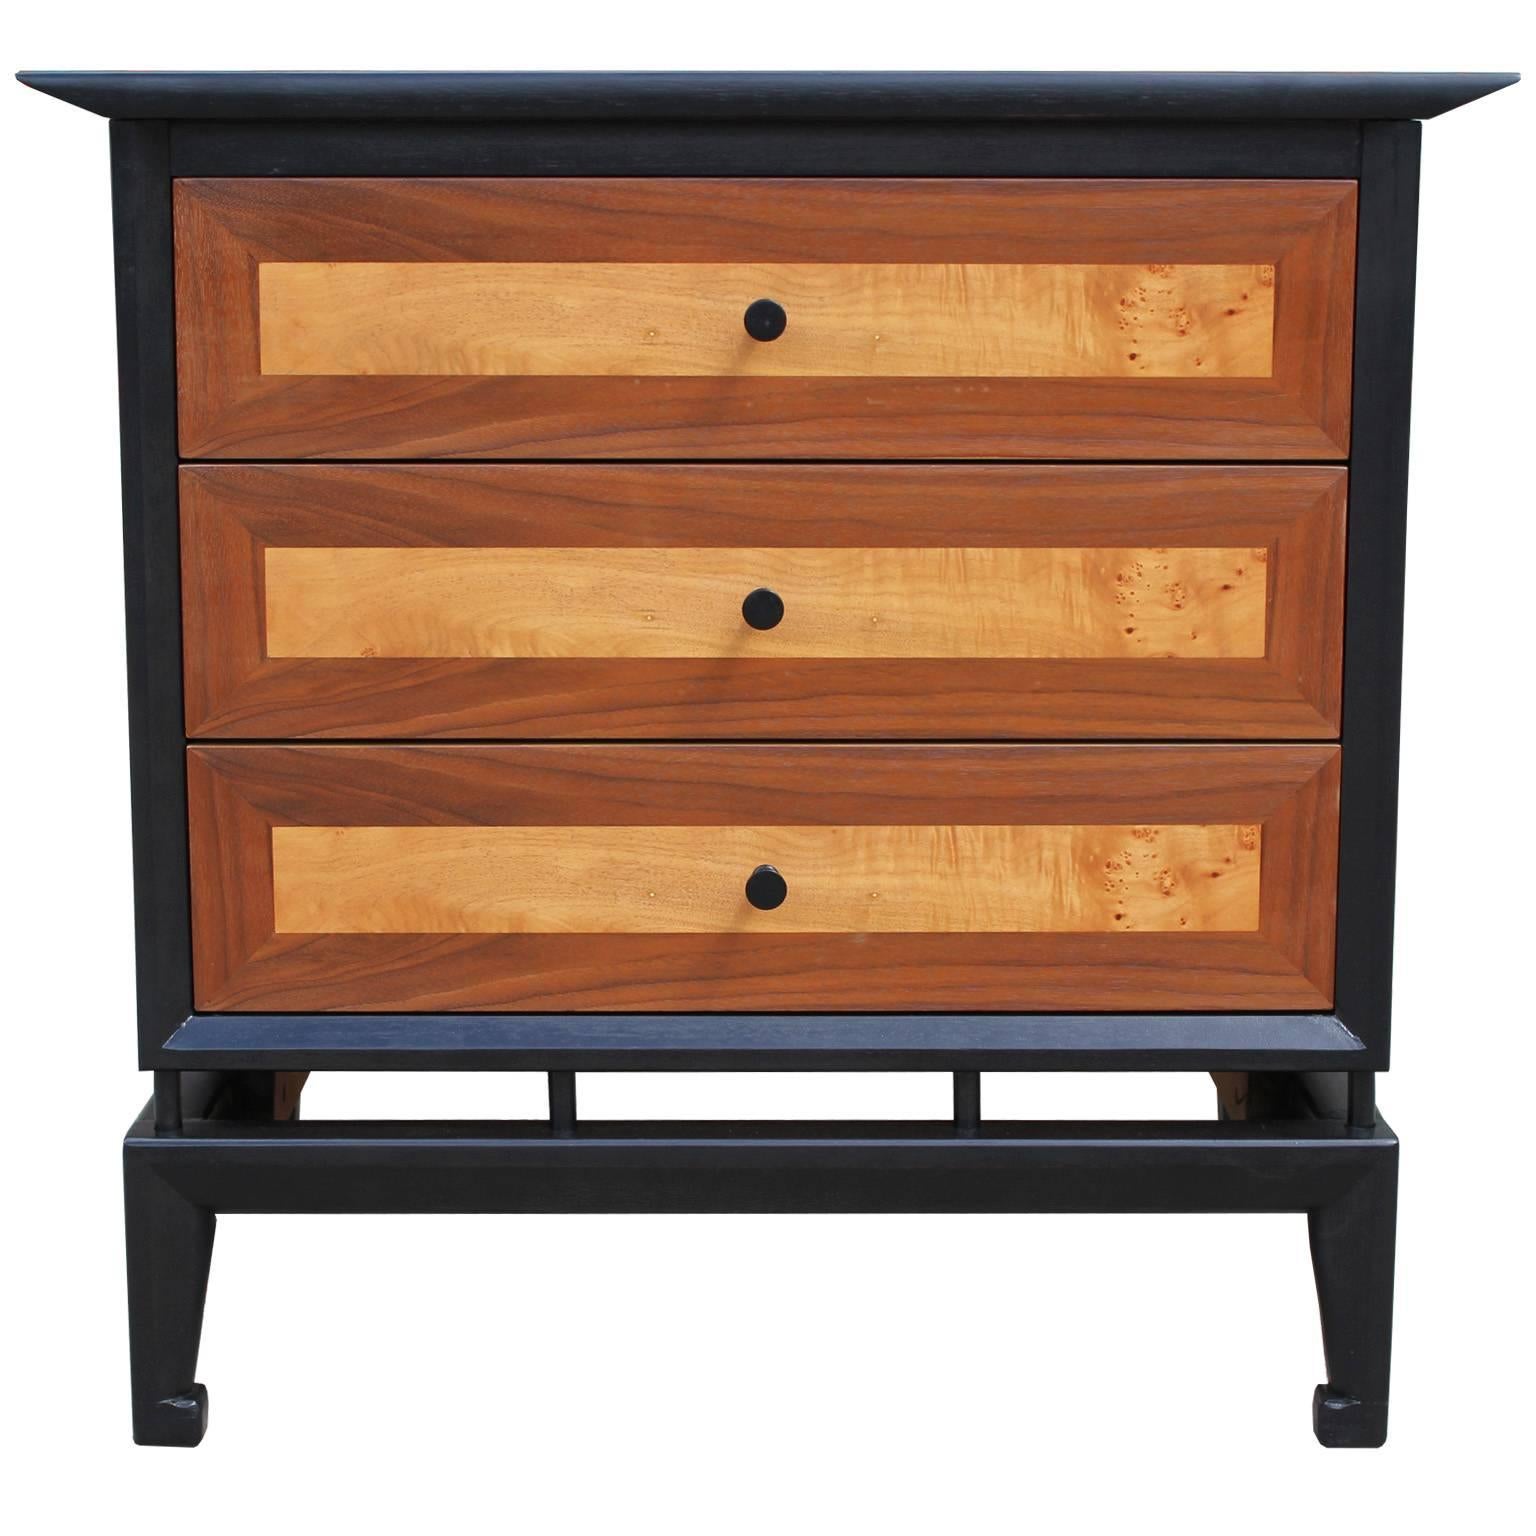 Wonderful pair of Asian influence nightstands or side tables. Cases are finished in an ebony stain which nicely showcases the two-tone natural drawer fronts. Three drawers provide excellent storage. Stunning from all angles.